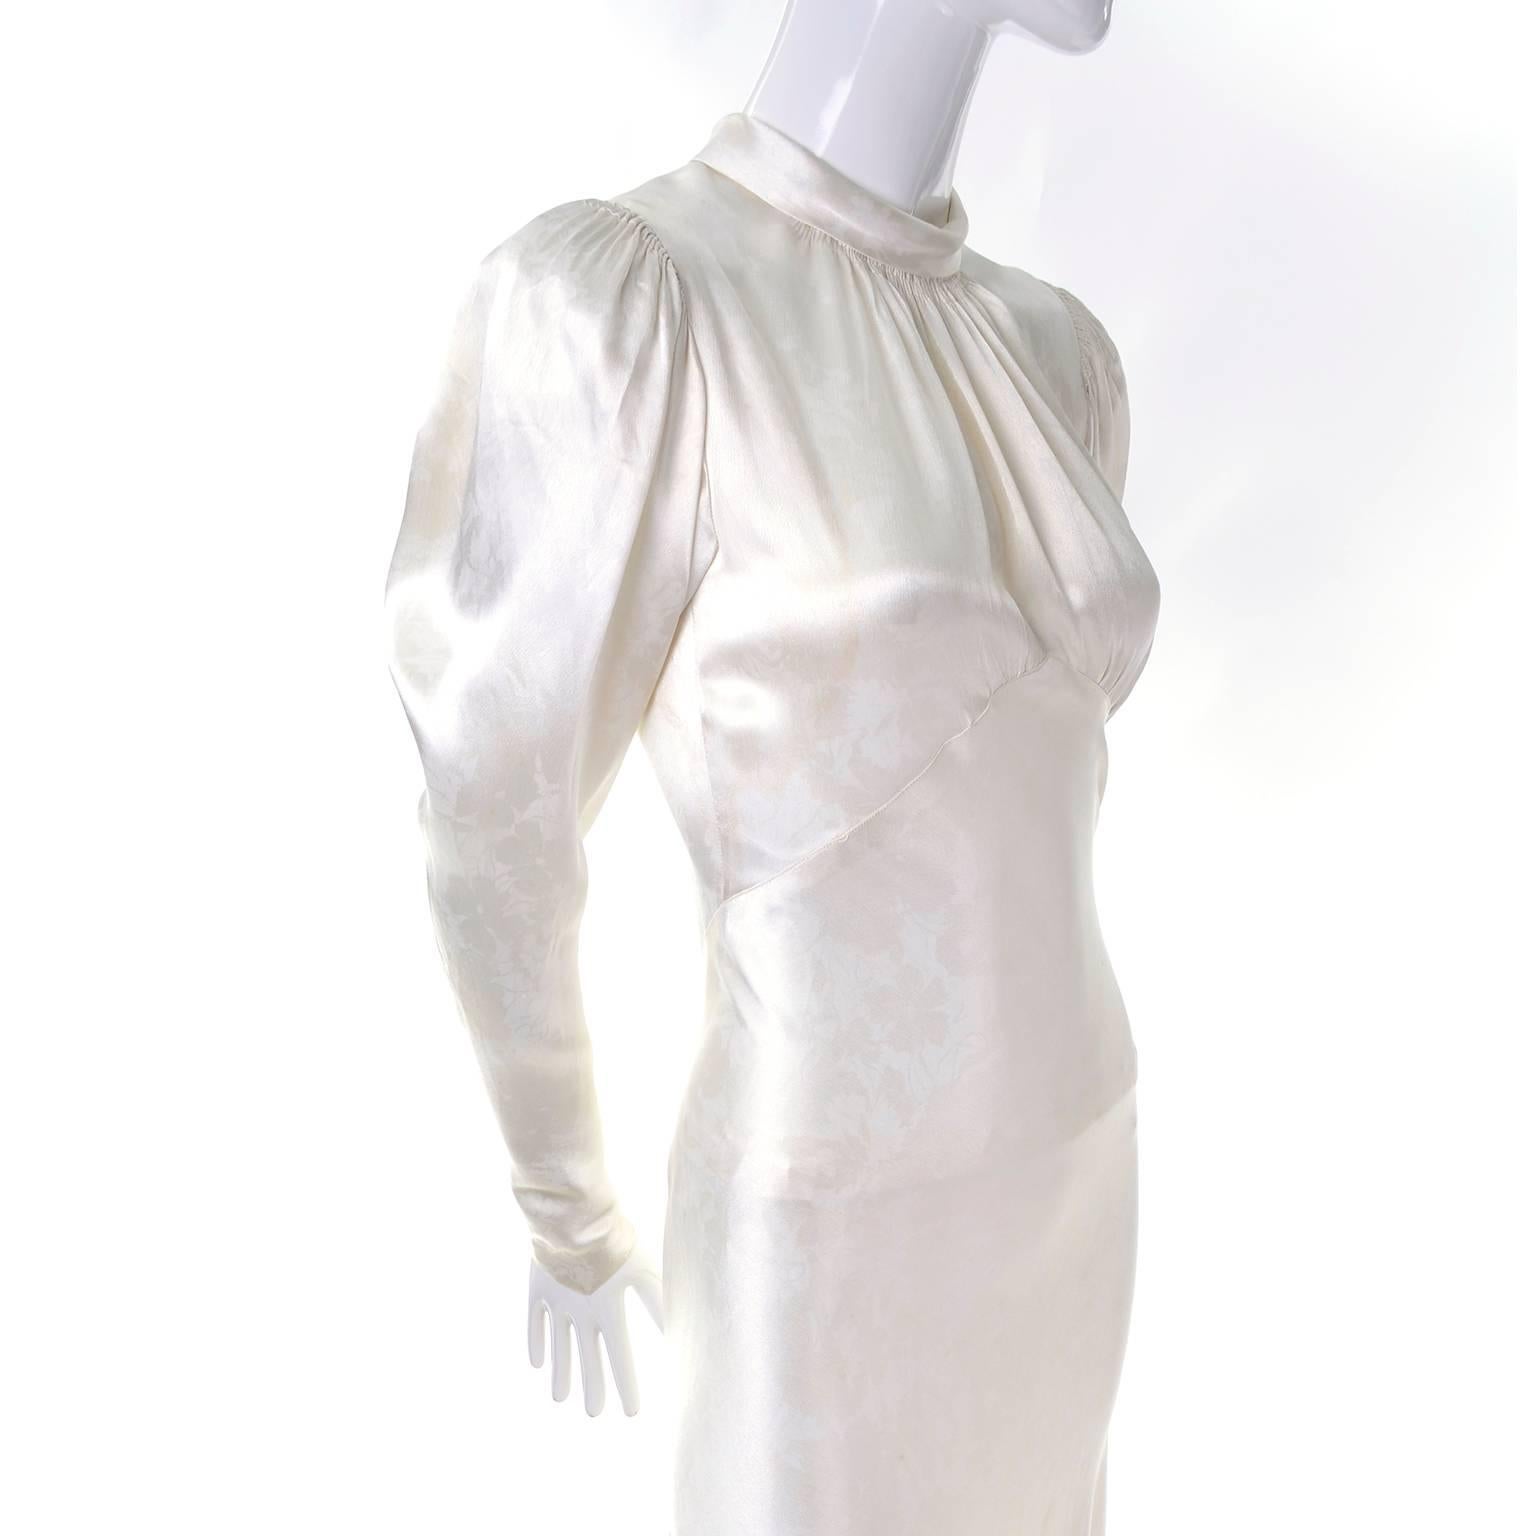 This beautiful ivory silk satin tone on tone floral patterned wedding gown is from 1939.  The dress has covered buttons up the front and on the pointed sleeves, a lovely train, and a gathered high neck that is somewhat reminiscent of Mainbocher's